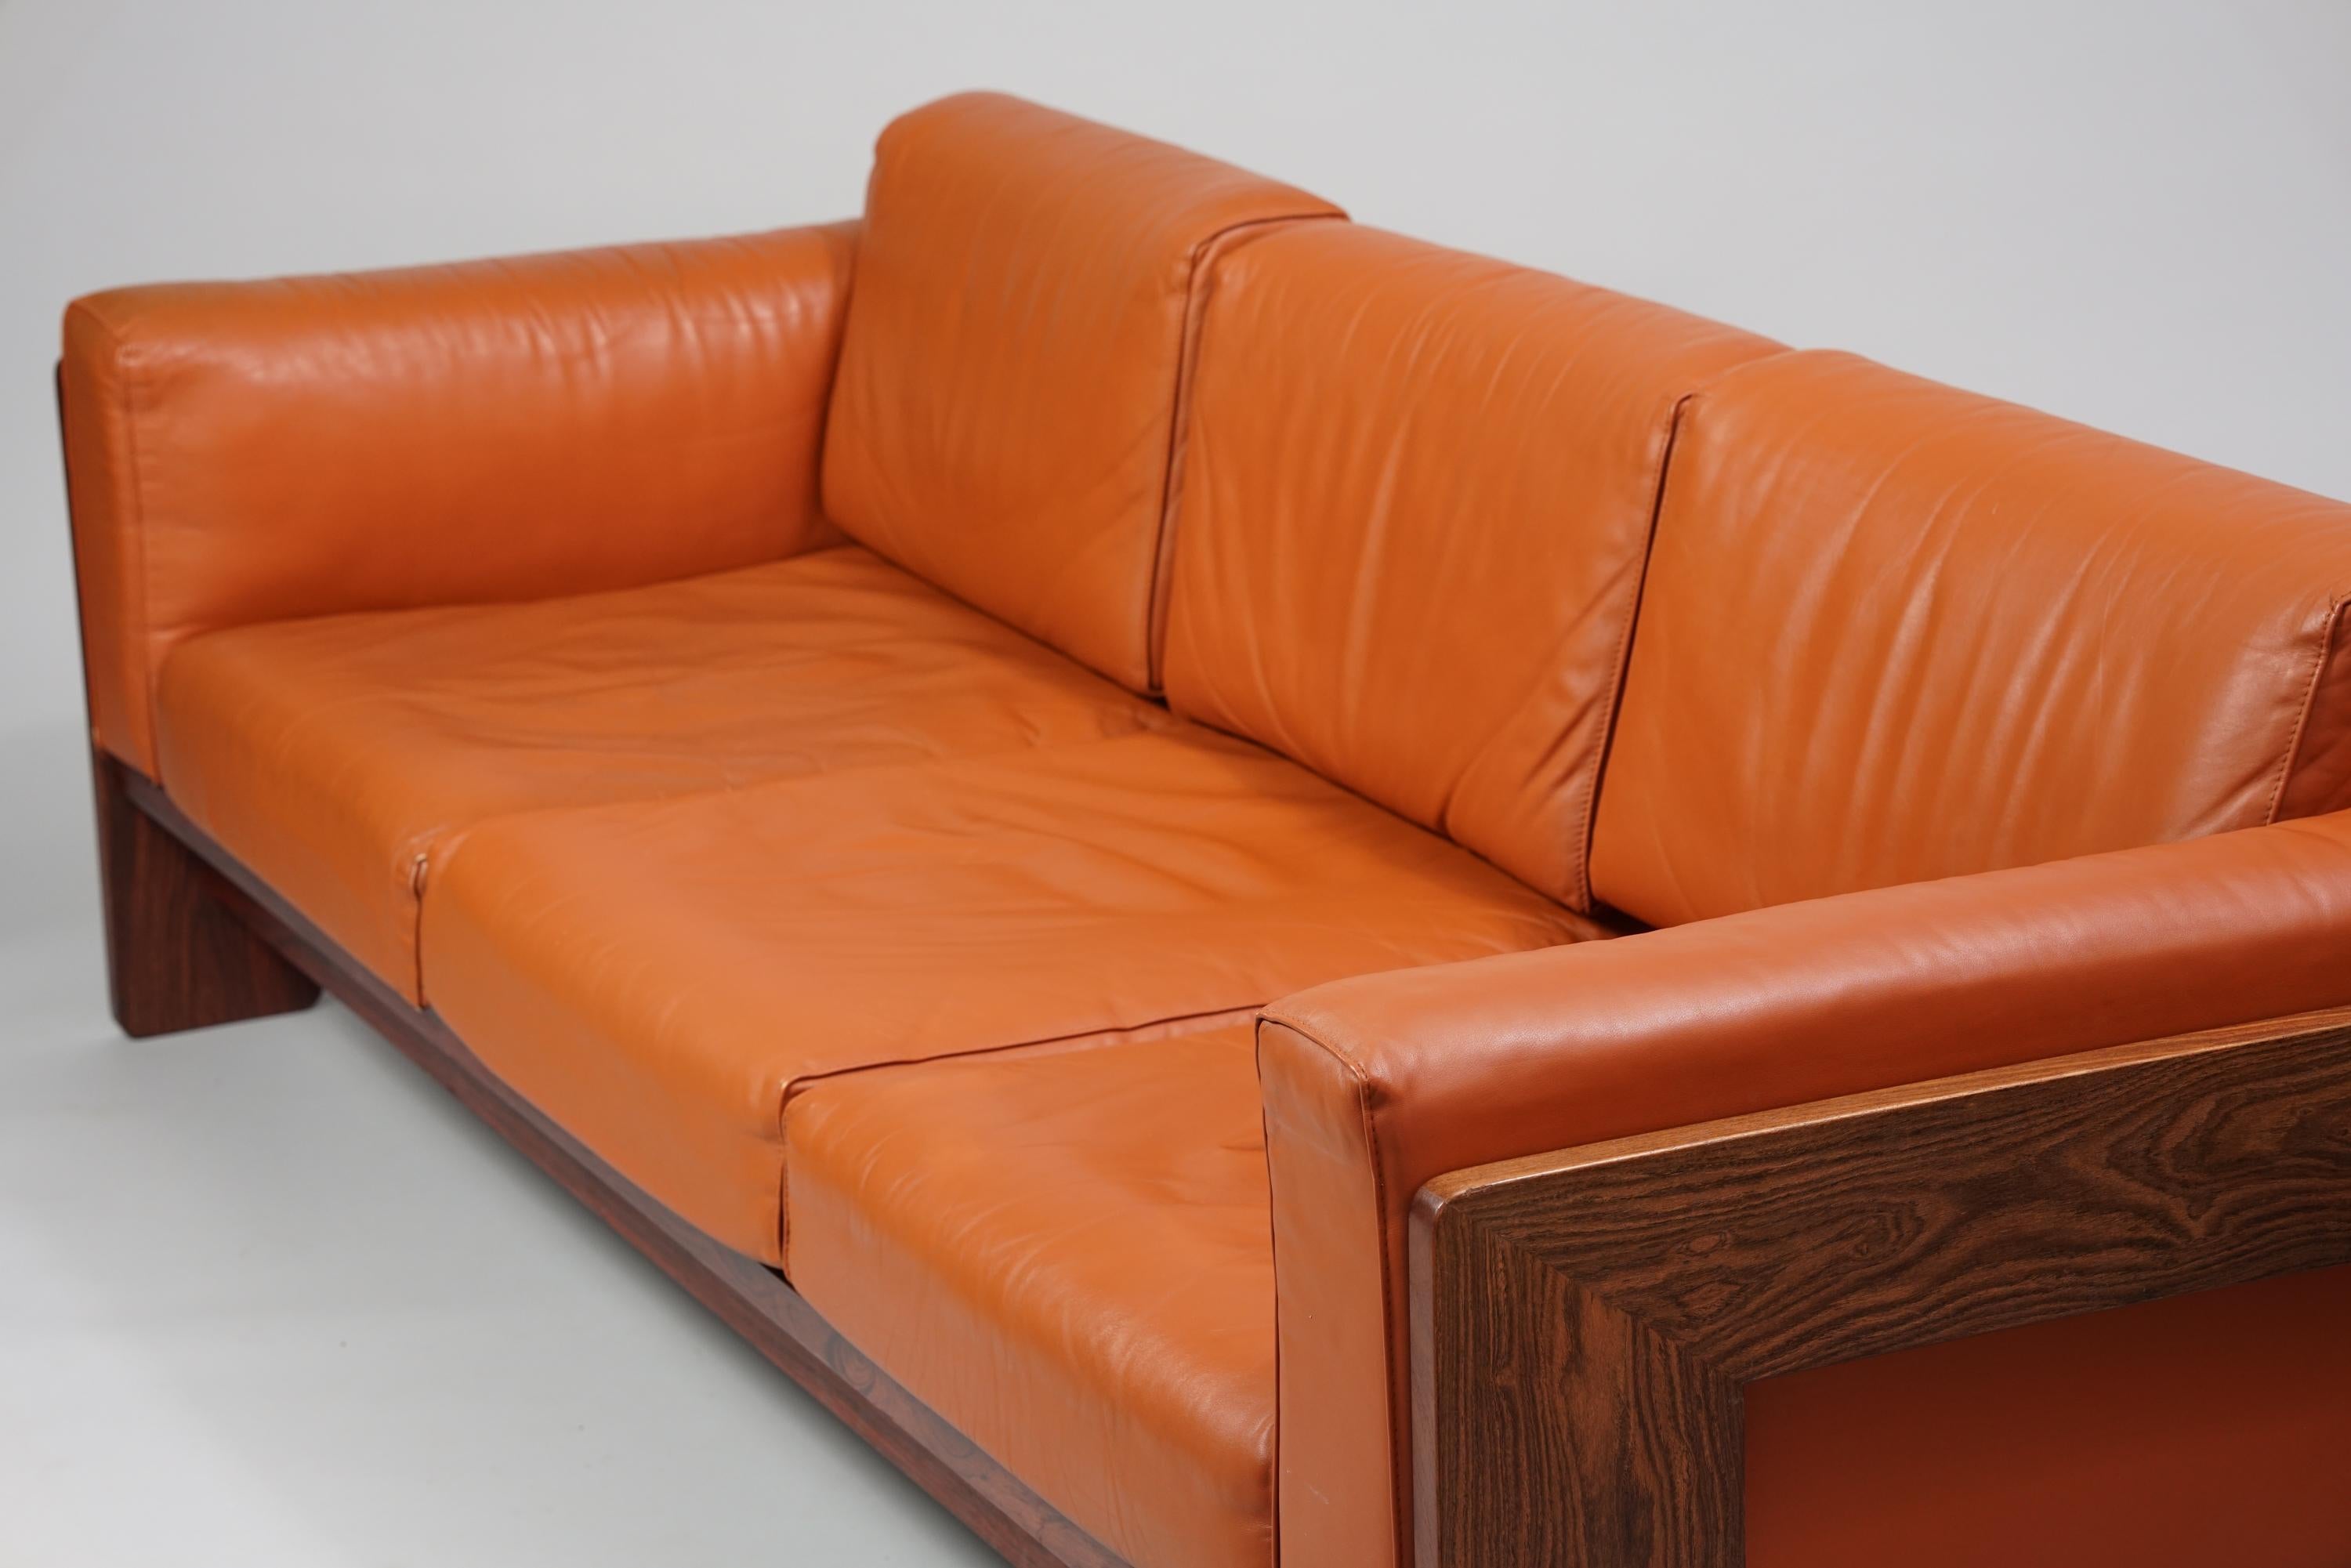 Mid-Century Modern Bastiano Sofa in Leather by Tobia Scarpa for Haimi Finland, 1960s